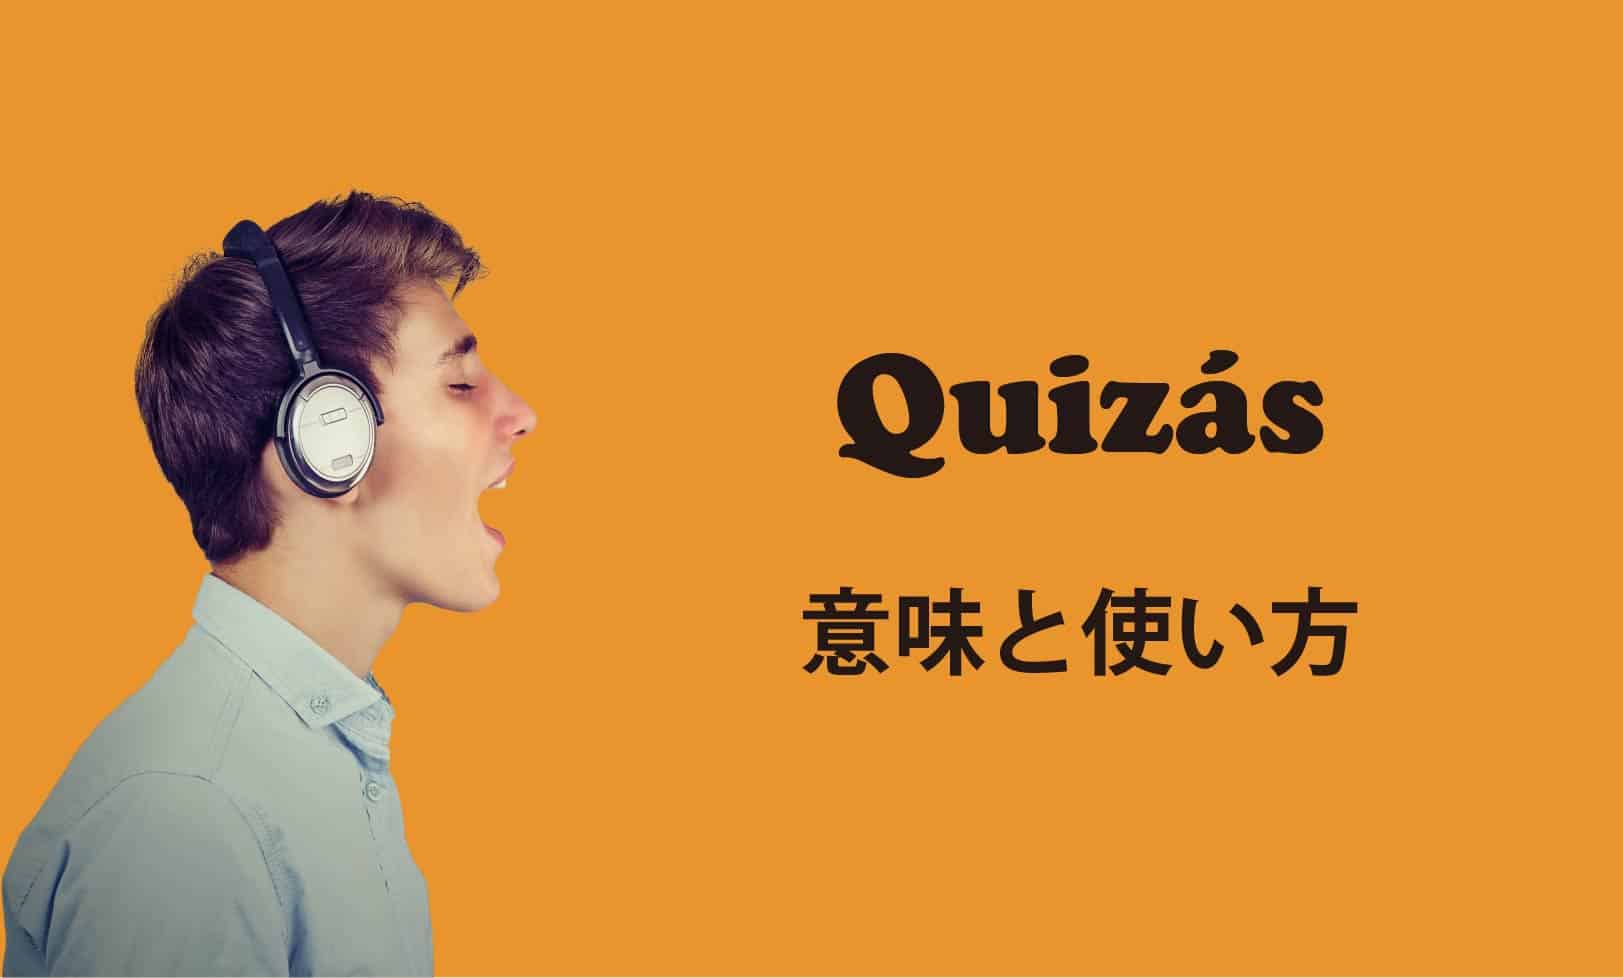 quizas ブログ　表紙